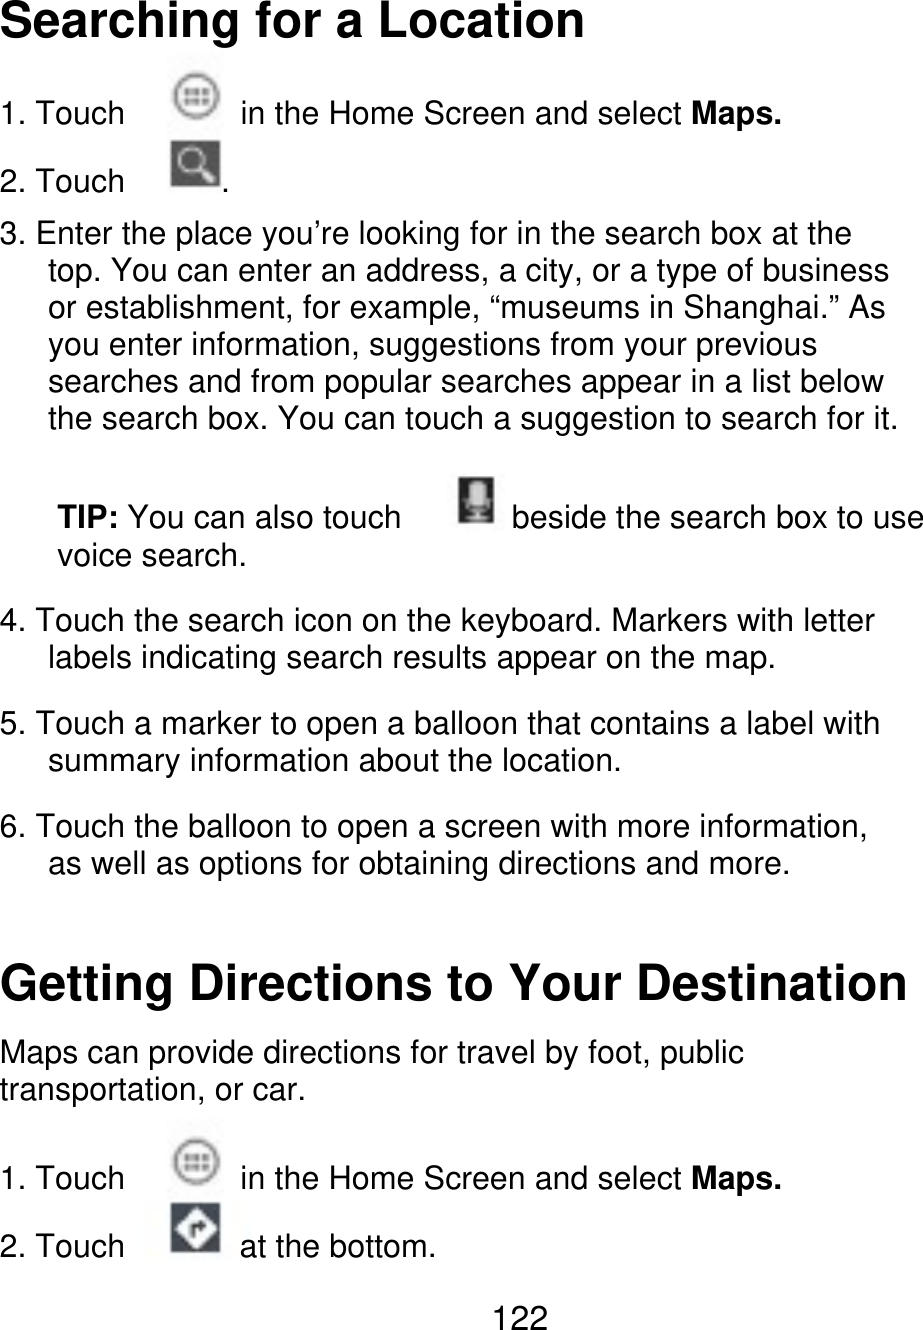 Searching for a Location 1. Touch 2. Touch . in the Home Screen and select Maps. 3. Enter the place you’re looking for in the search box at the    top. You can enter an address, a city, or a type of business    or establishment, for example, “museums in Shanghai.” As    you enter information, suggestions from your previous    searches and from popular searches appear in a list below       the search box. You can touch a suggestion to search for it. TIP: You can also touch voice search. beside the search box to use 4. Touch the search icon on the keyboard. Markers with letter       labels indicating search results appear on the map. 5. Touch a marker to open a balloon that contains a label with       summary information about the location. 6. Touch the balloon to open a screen with more information,    as well as options for obtaining directions and more. Getting Directions to Your Destination Maps can provide directions for travel by foot, public transportation, or car. 1. Touch 2. Touch in the Home Screen and select Maps. at the bottom. 122 